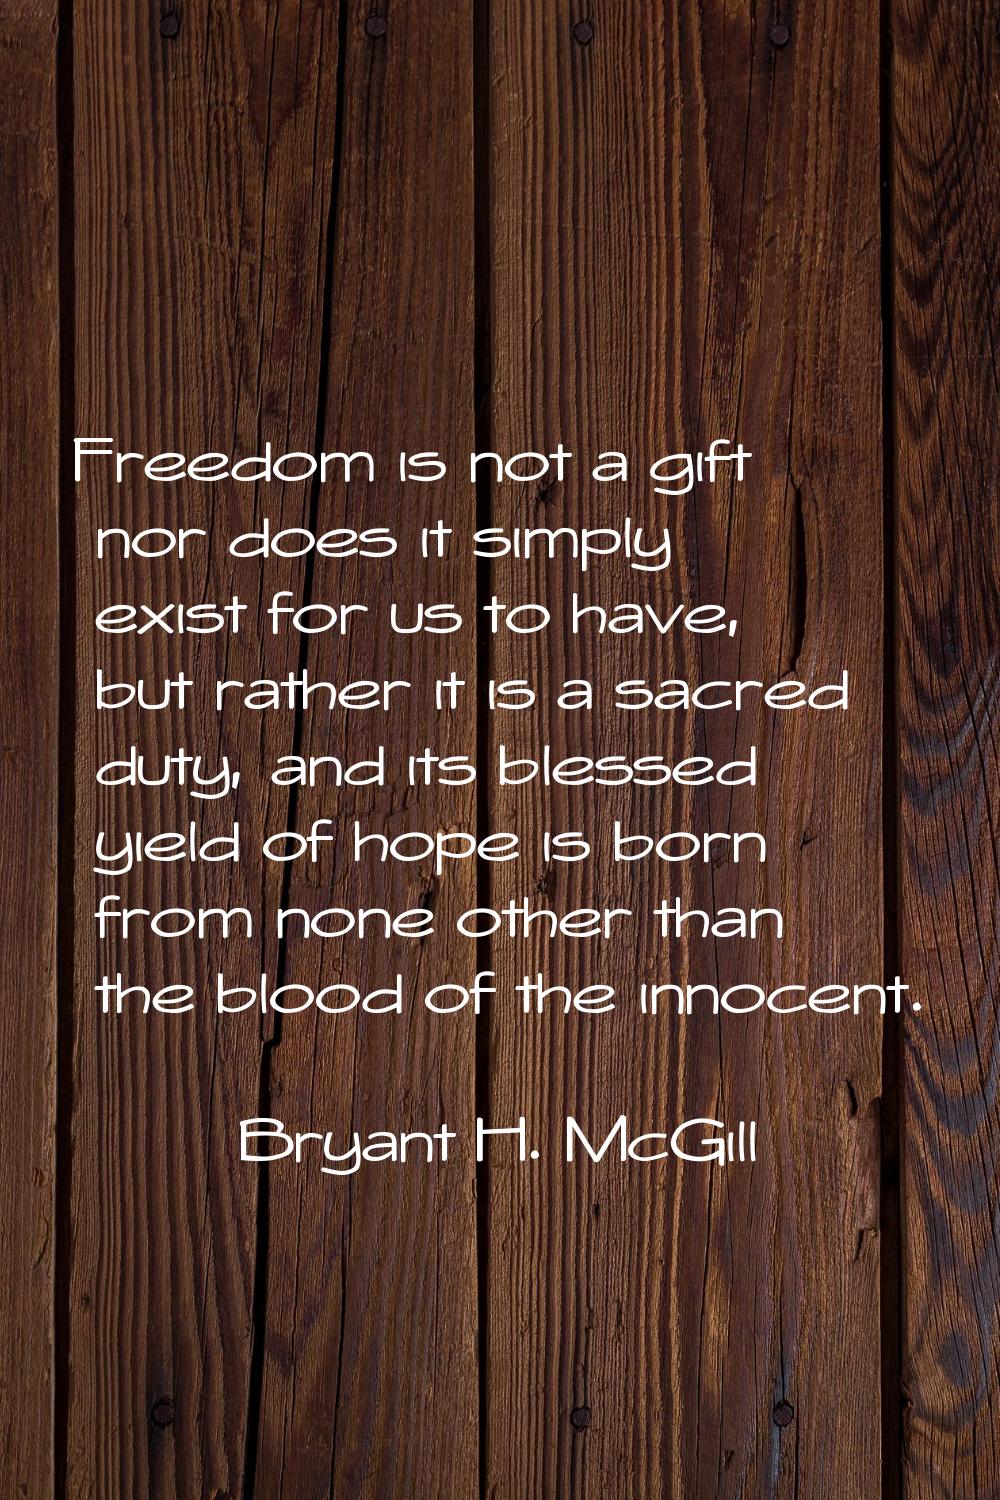 Freedom is not a gift nor does it simply exist for us to have, but rather it is a sacred duty, and 